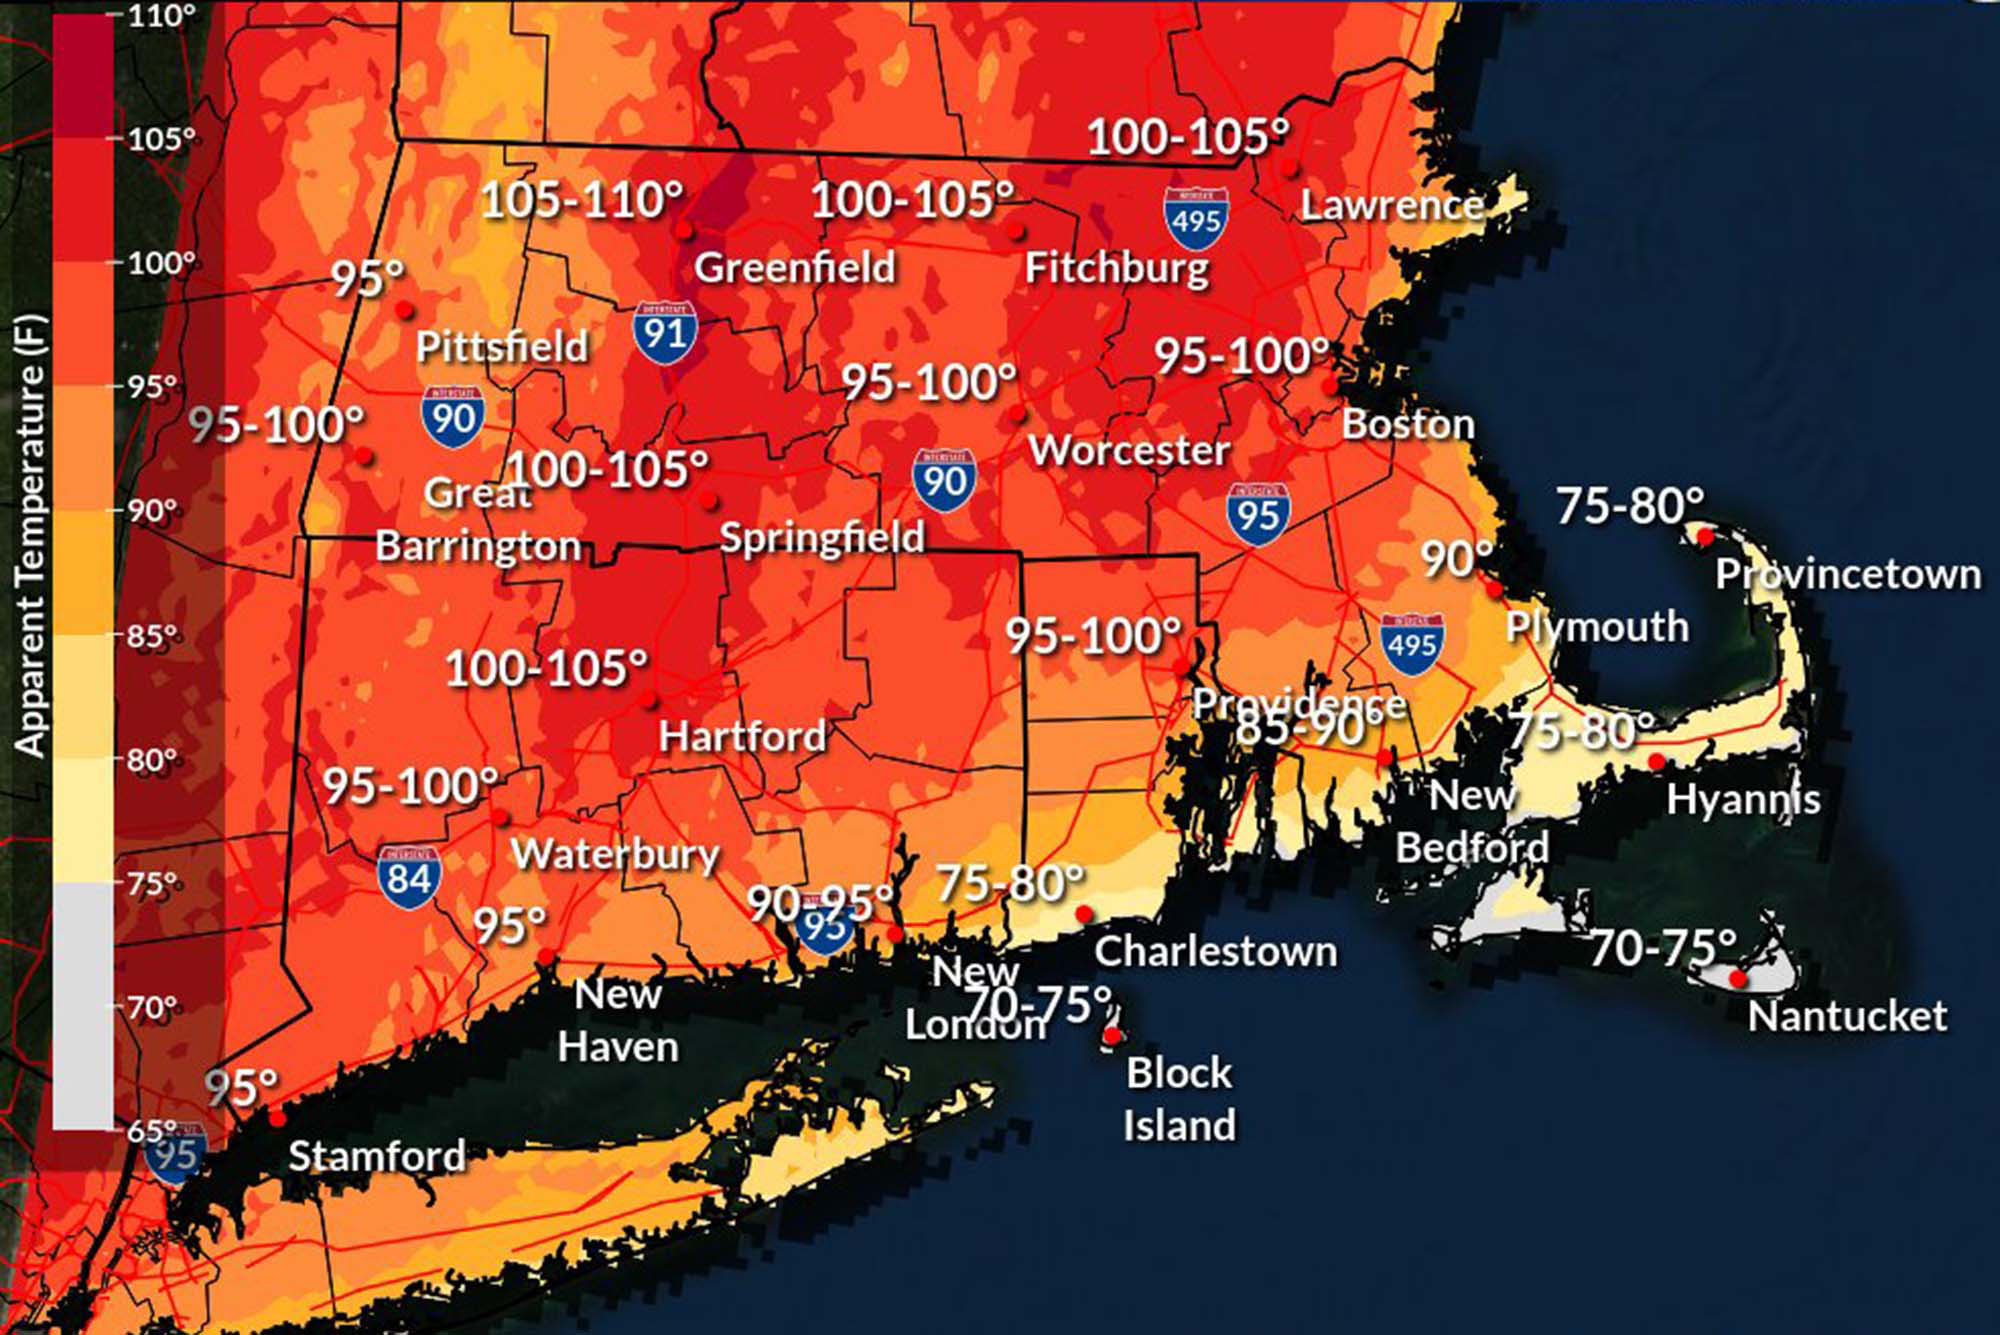 Photo: A picture of a map of the New England region of the United States covered in red and depicting a heat wave with extremely high temperatures